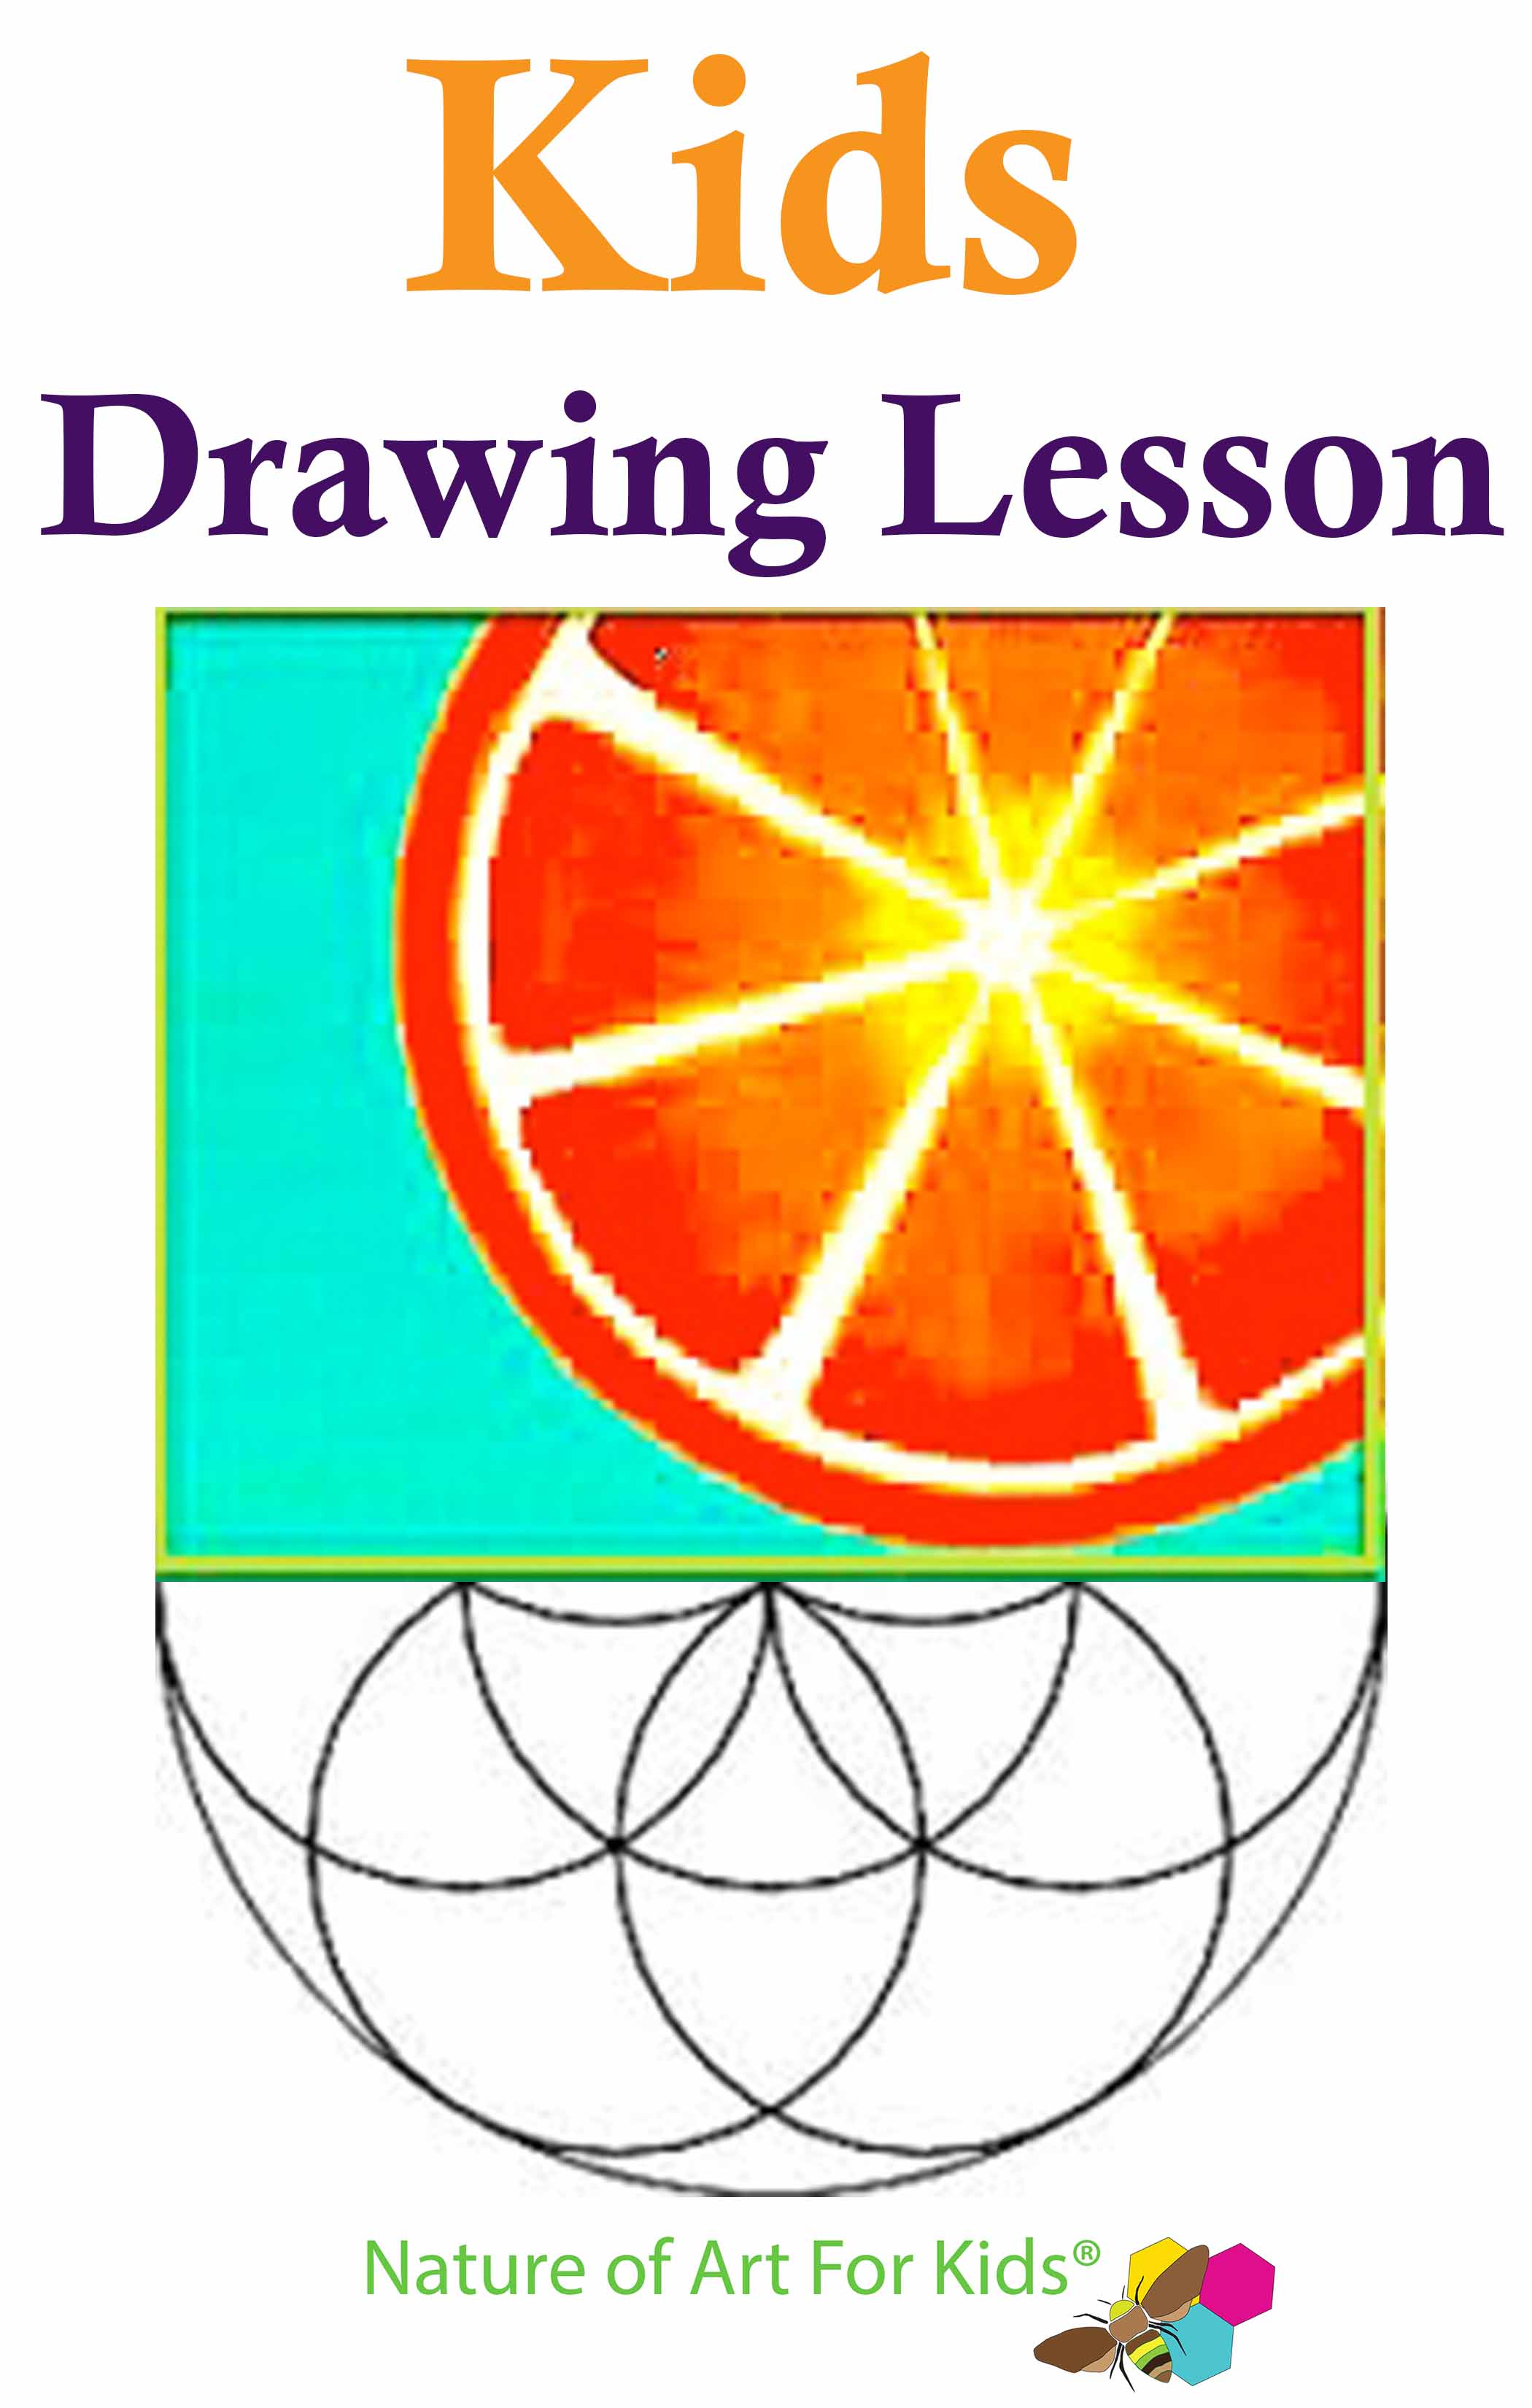 fruit drawing for kids